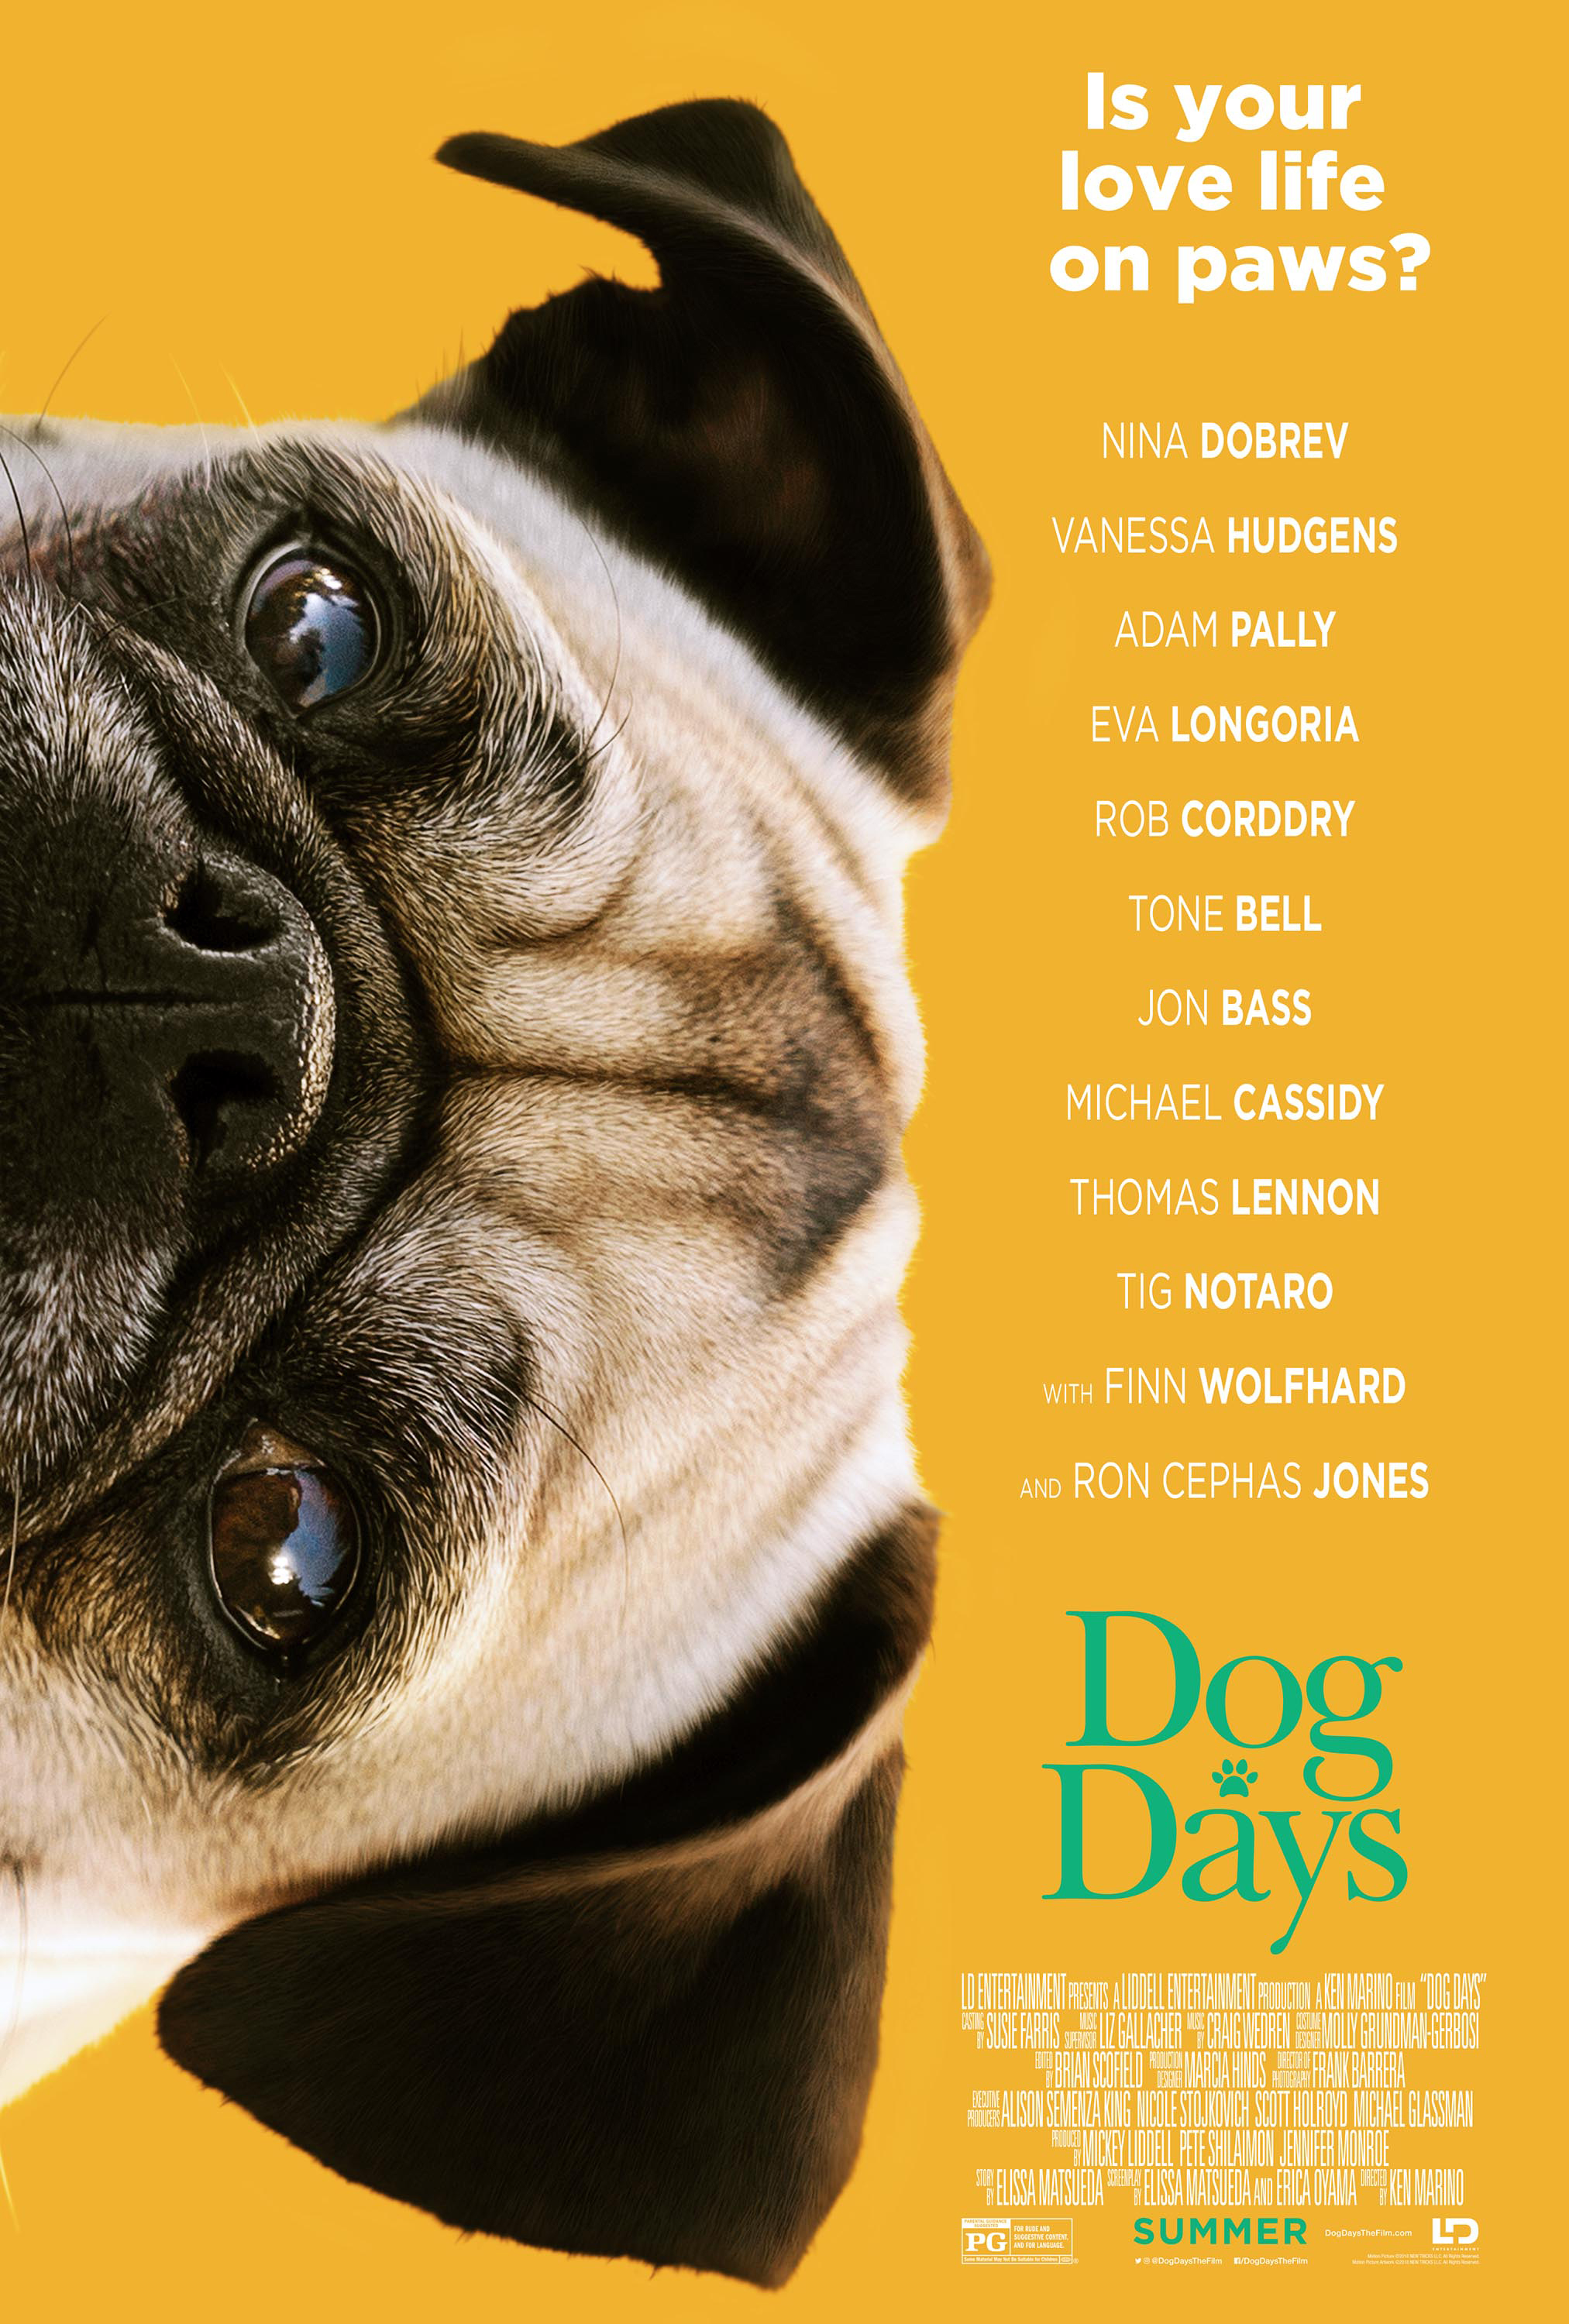 Dog Days character poster (LD Entertainment)